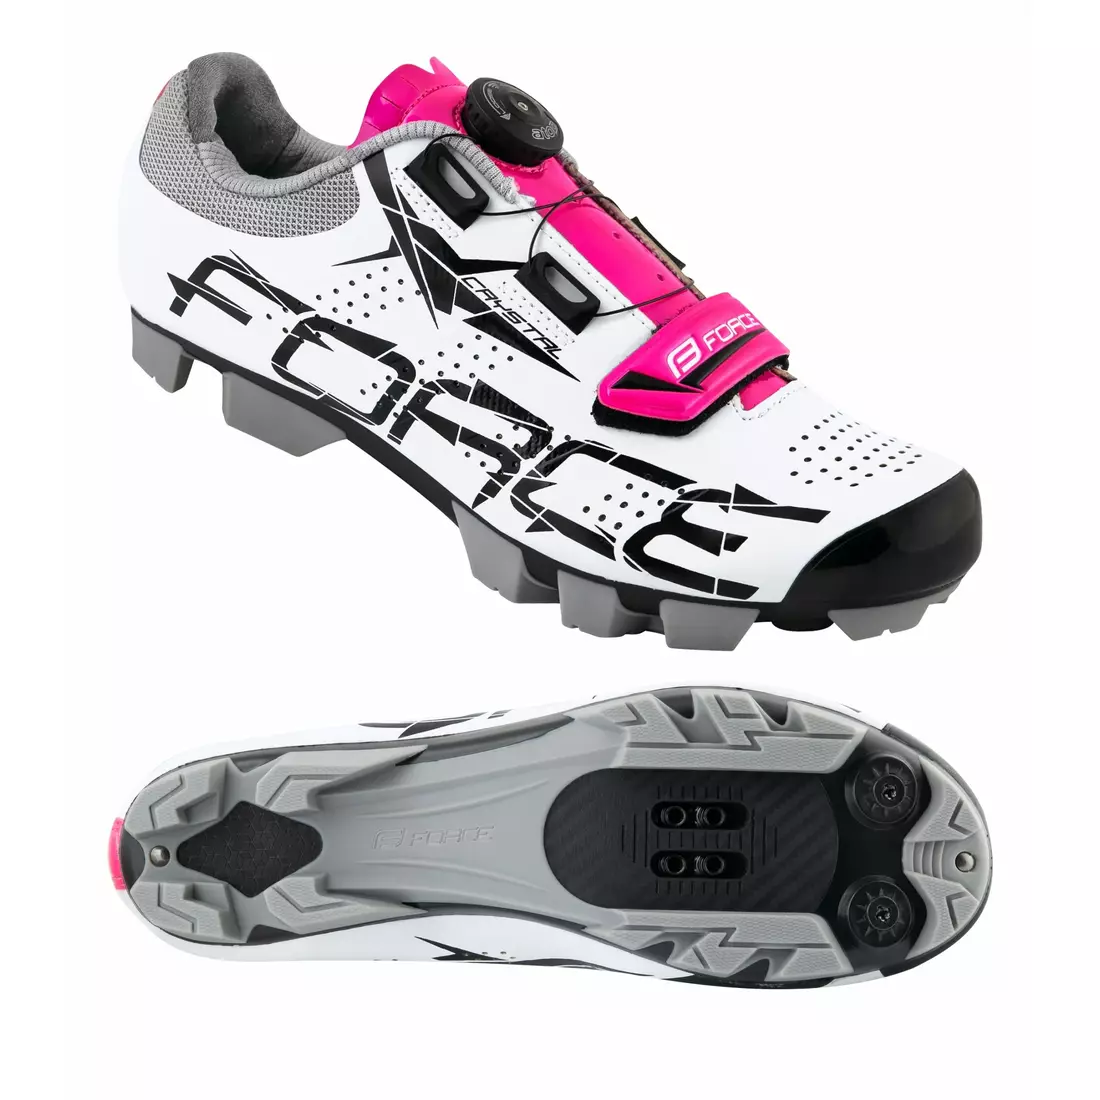 FORCE MTB CRYSTAL women bicycle shoes, white-pink 9407238